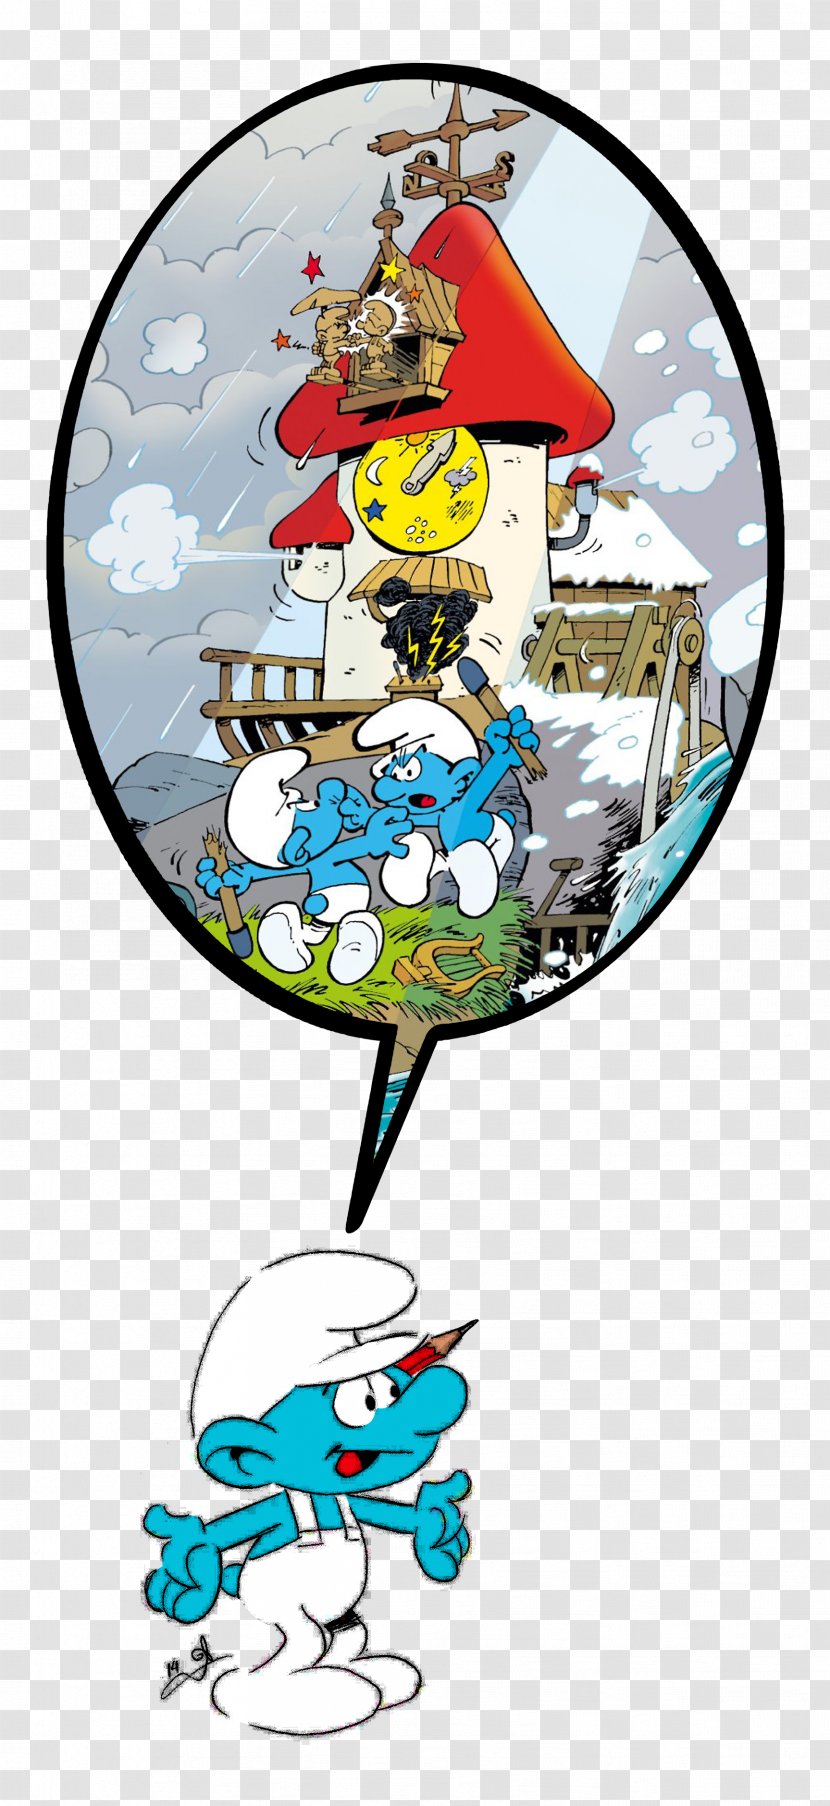 The Smurfs Character Cinehollywood Illinois - Tree - Quarrel Transparent PNG